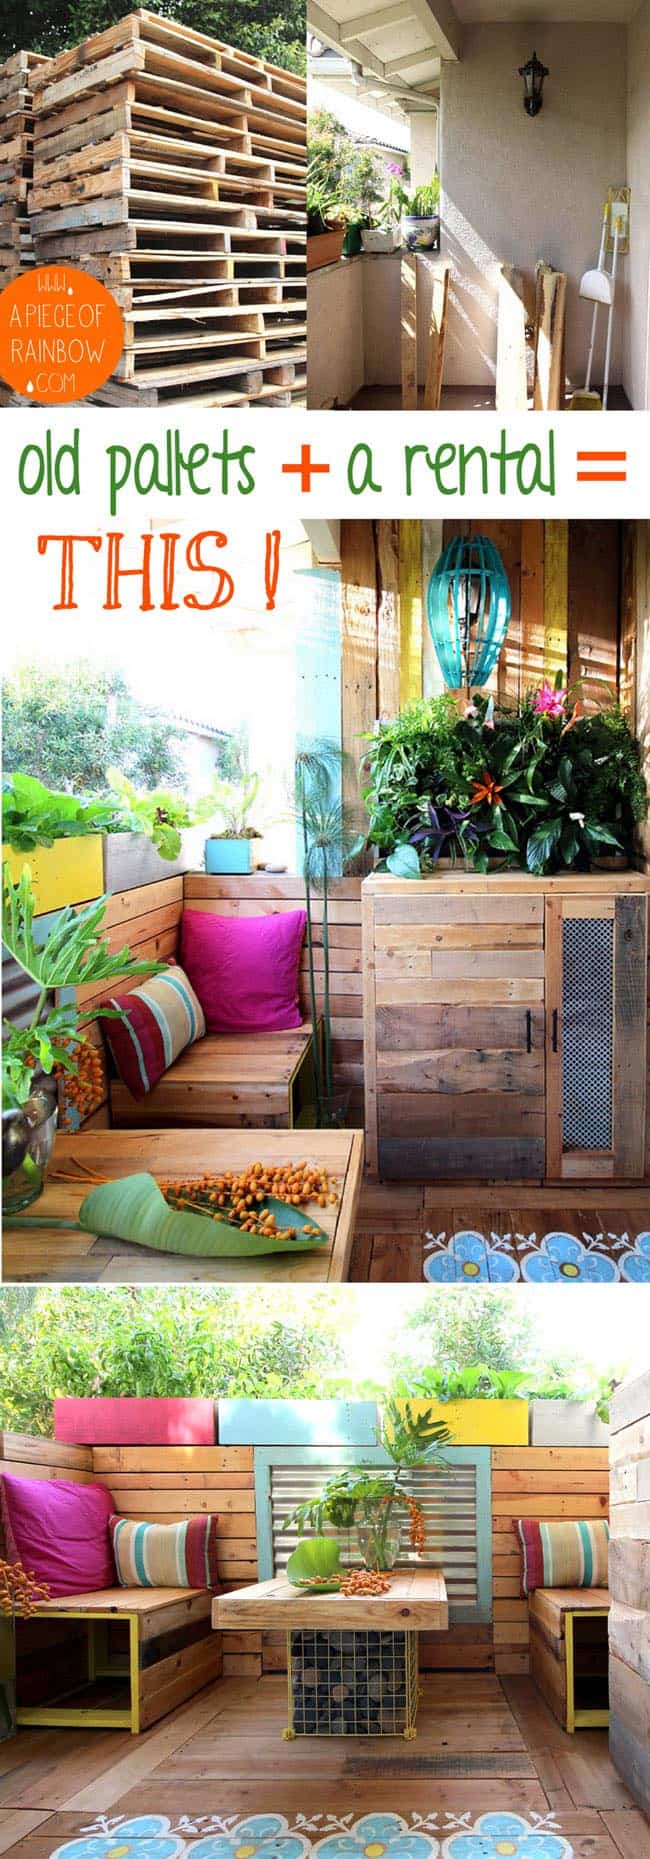 Build a stunning tropical outdoor room with pallets 